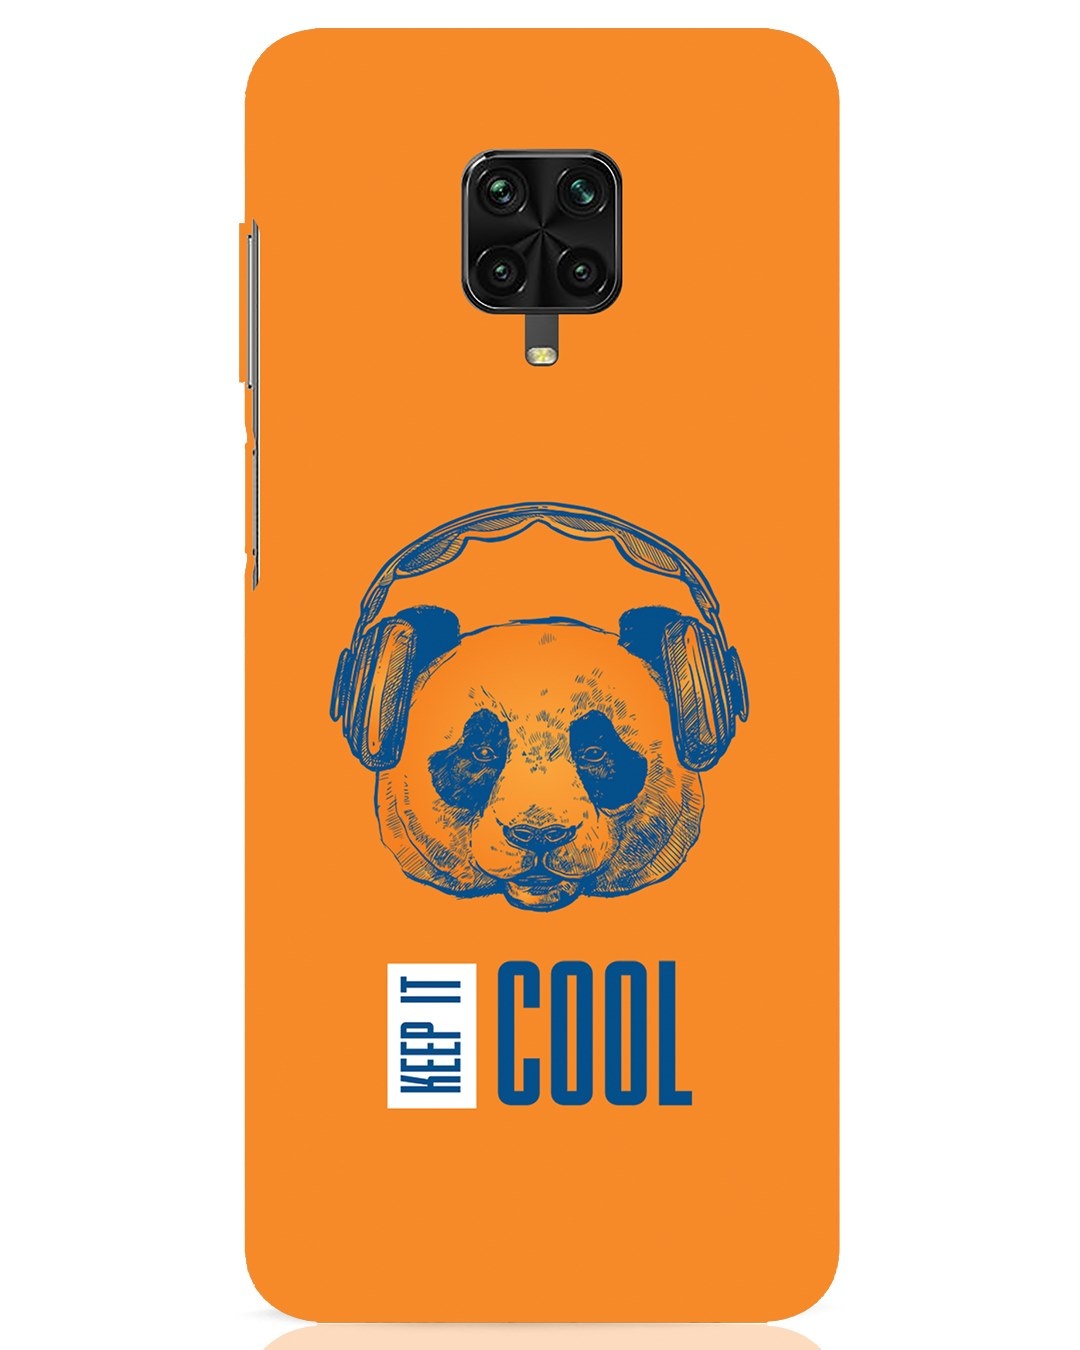 Buy Keep It Cool Xiaomi Poco M2 Pro Mobile Covers Mobile Case Online At ₹1990 7309